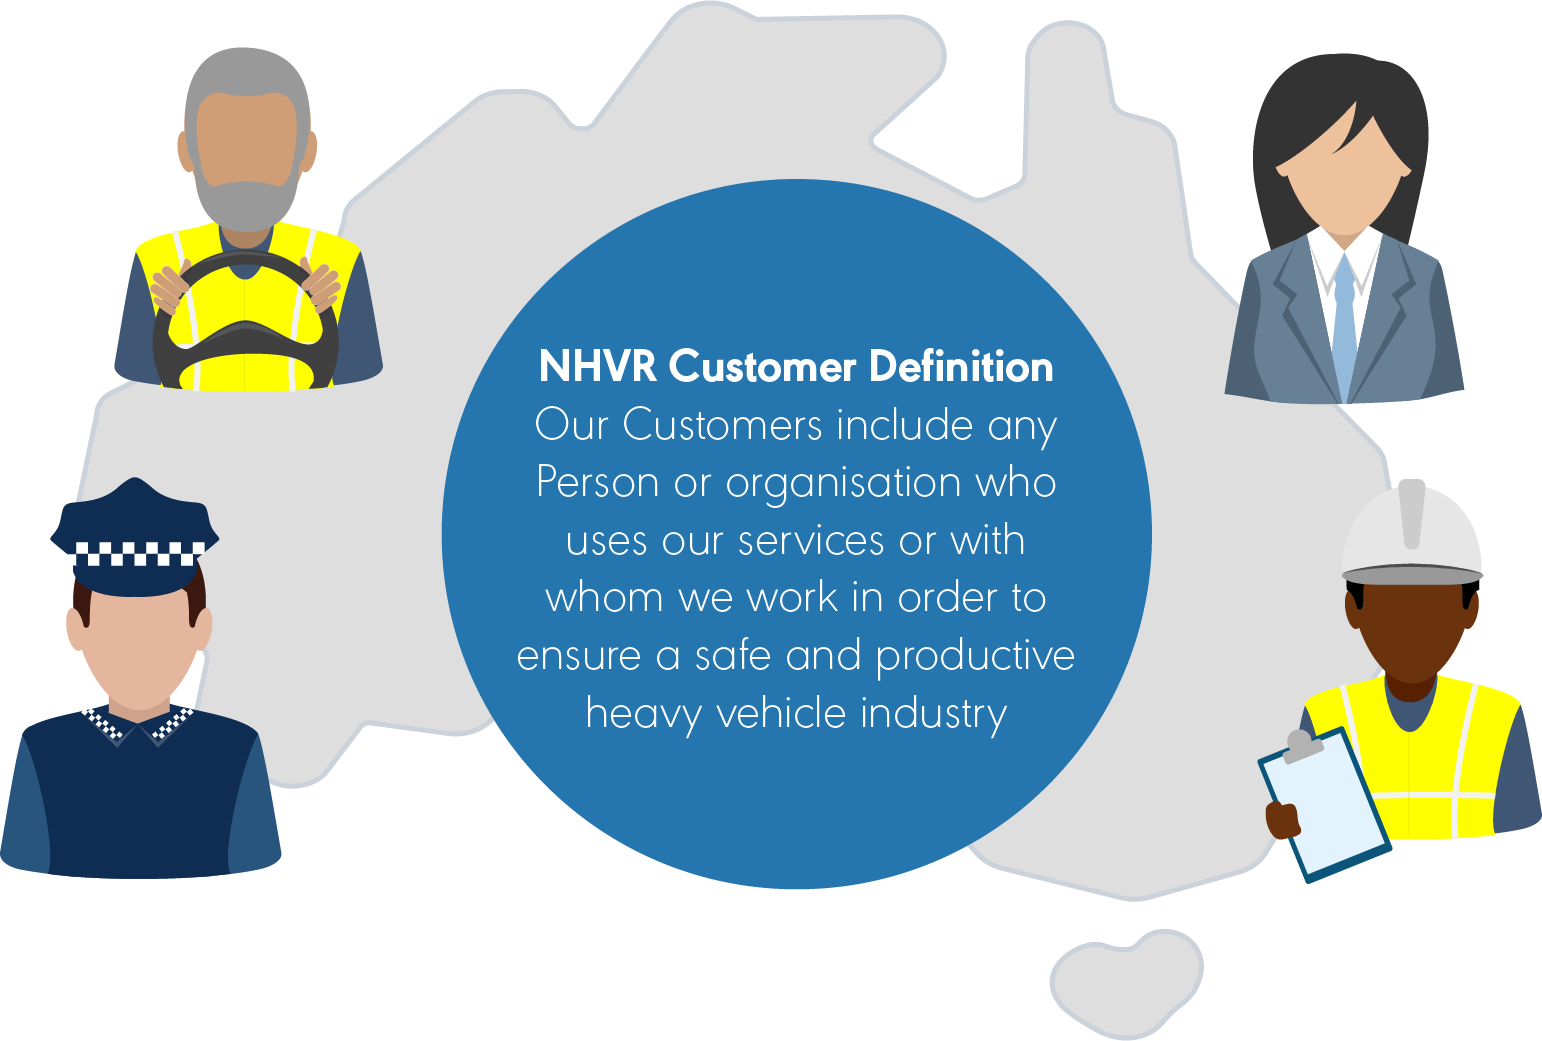 NHVR Customer Definition - Our customers include any person or organisation who uses our services or with whom we work in order to ensure a safe and productive heavy vehicle industry.